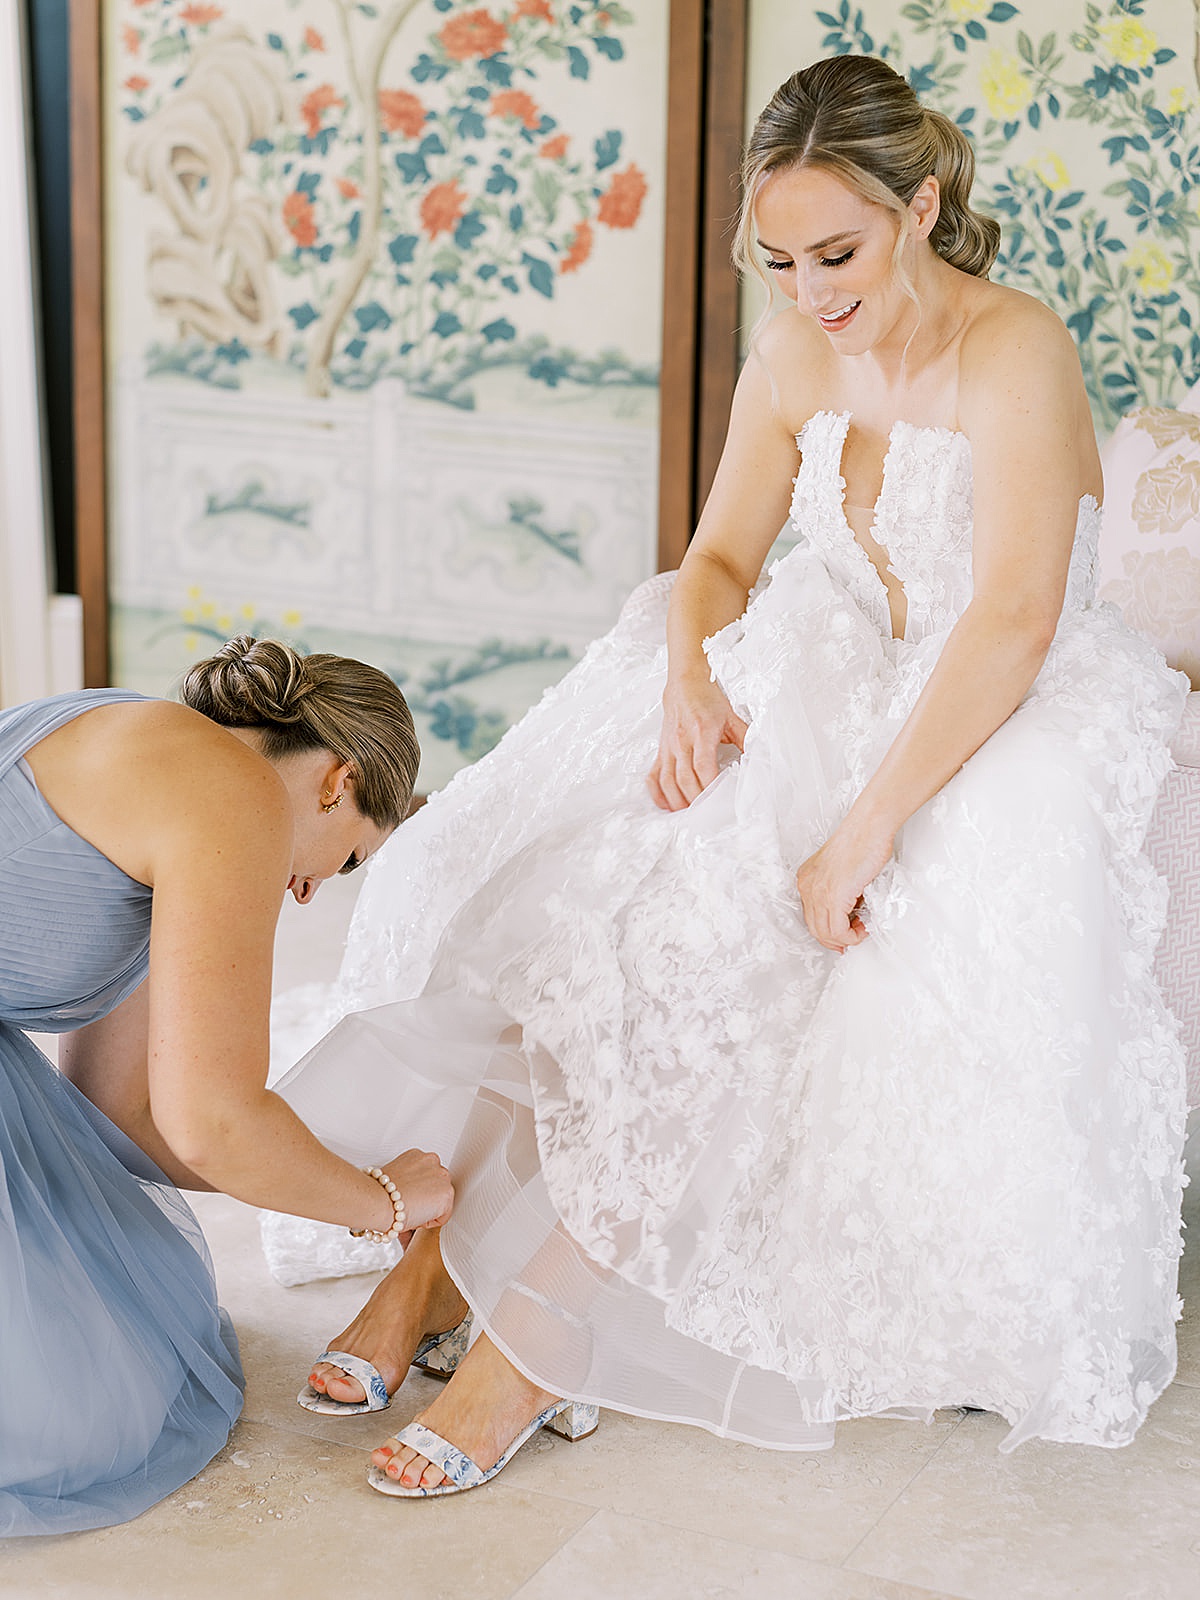 Bridesmaid adjusts bride's floral blue high heel shoe as bridal party gets ready for Chicago summer backyard wedding